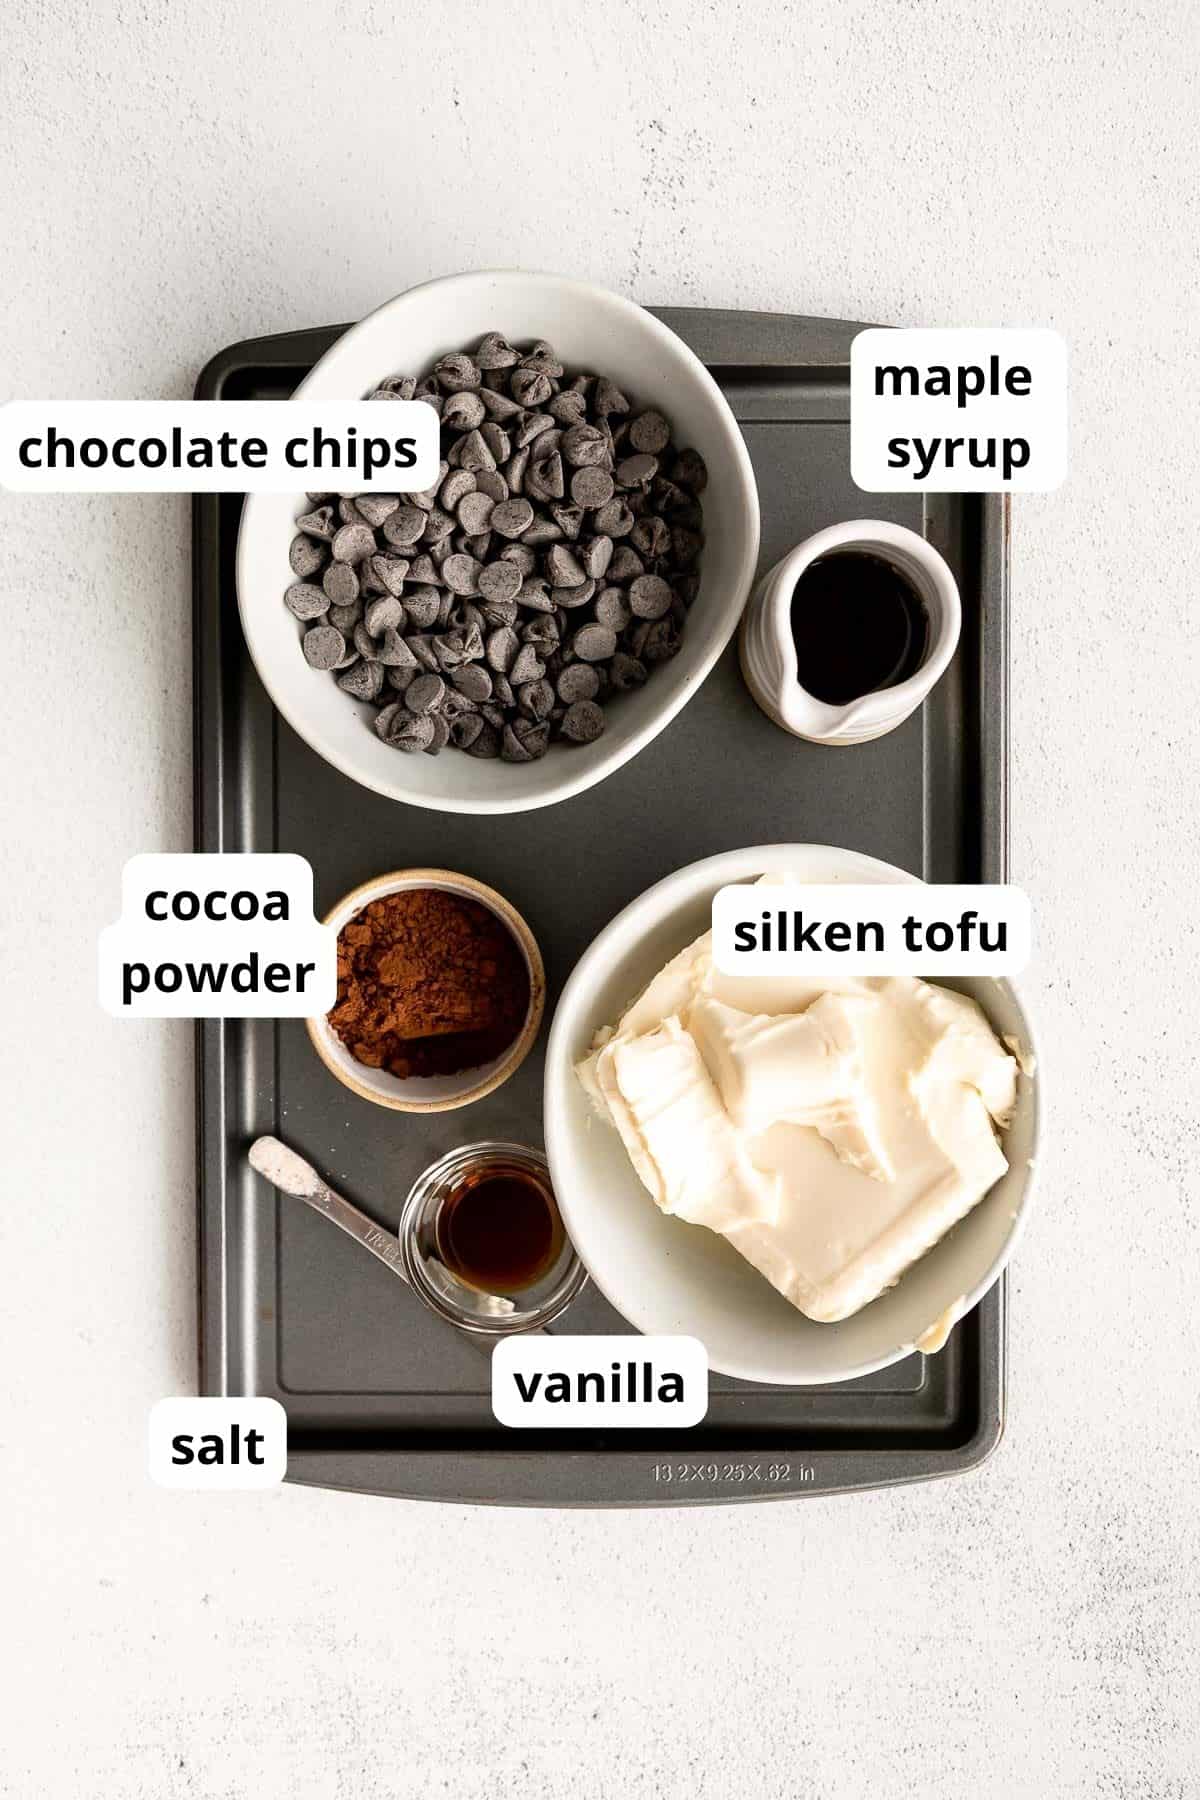 ingredients for the recipe in bowls with labels